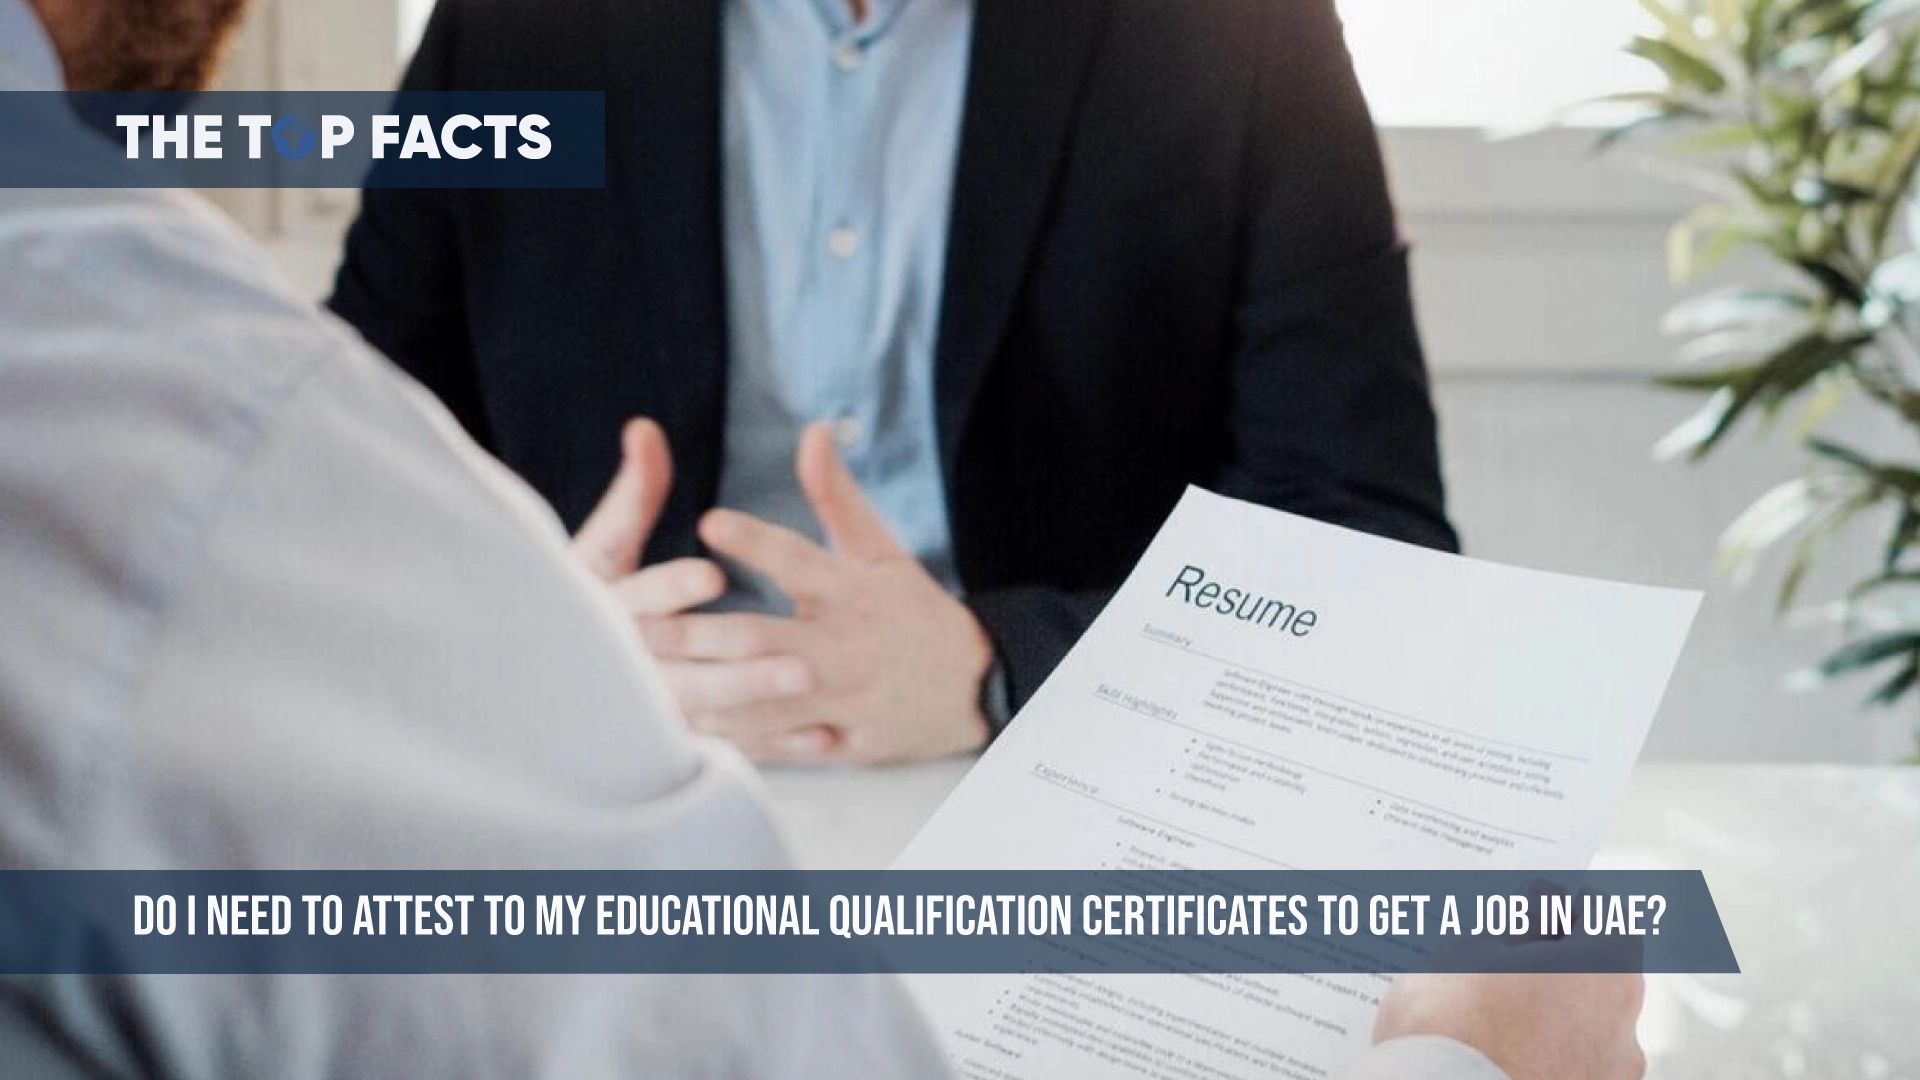 Do I need to attest to my educational qualification certificates to get a job in UAE?